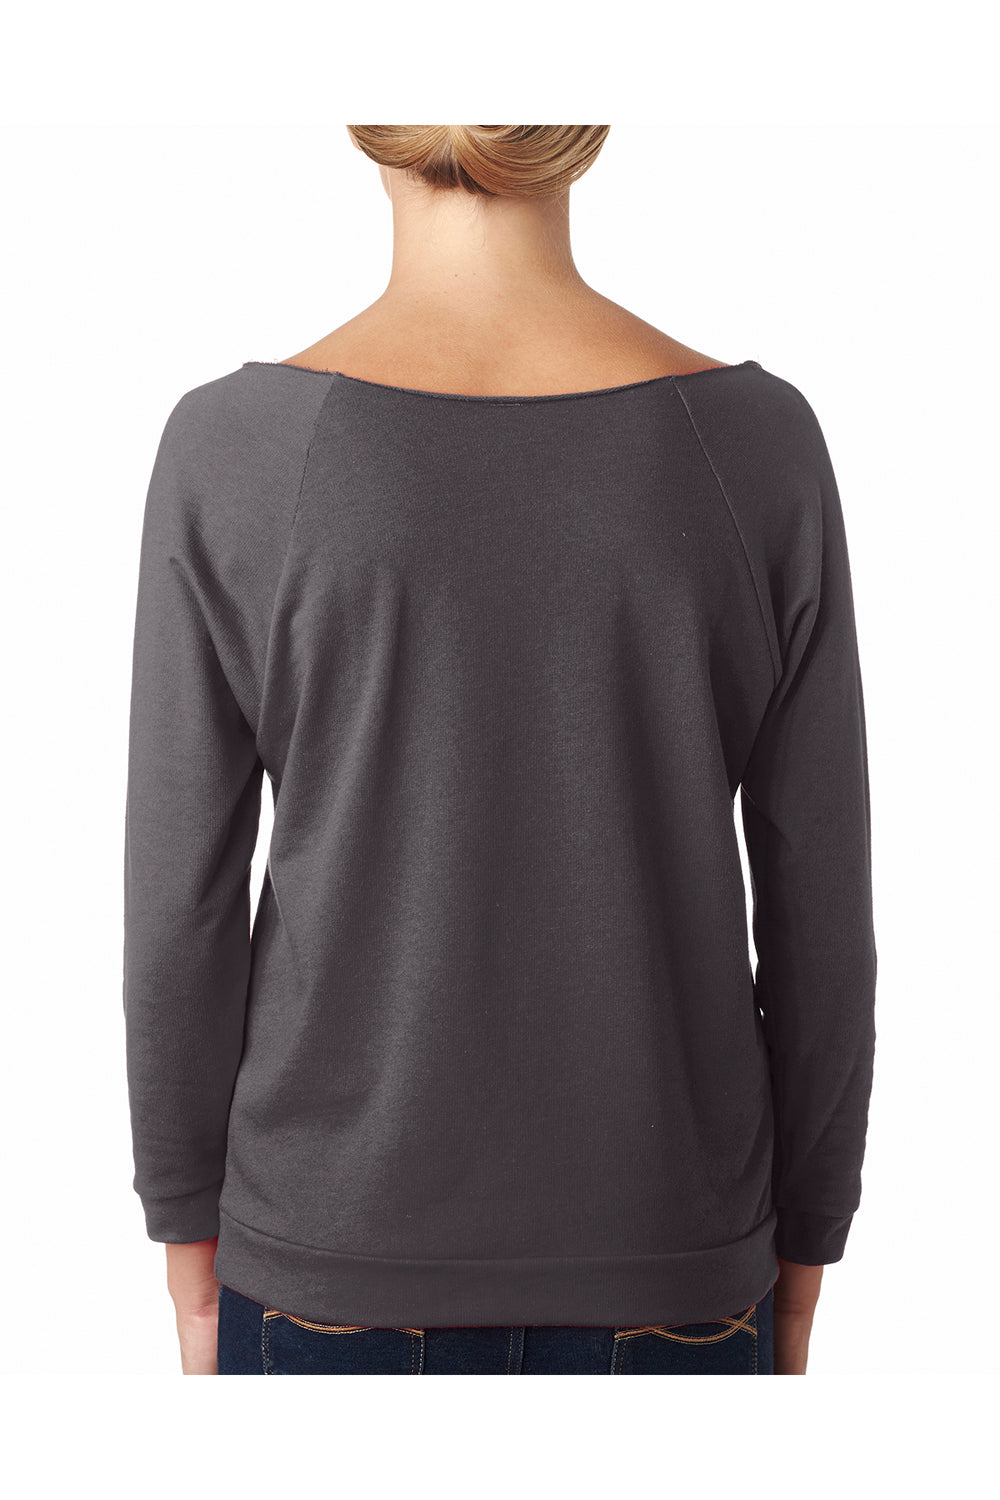 Next Level 6951 Womens French Terry 3/4 Sleeve Wide Neck T-Shirt Dark Grey Back